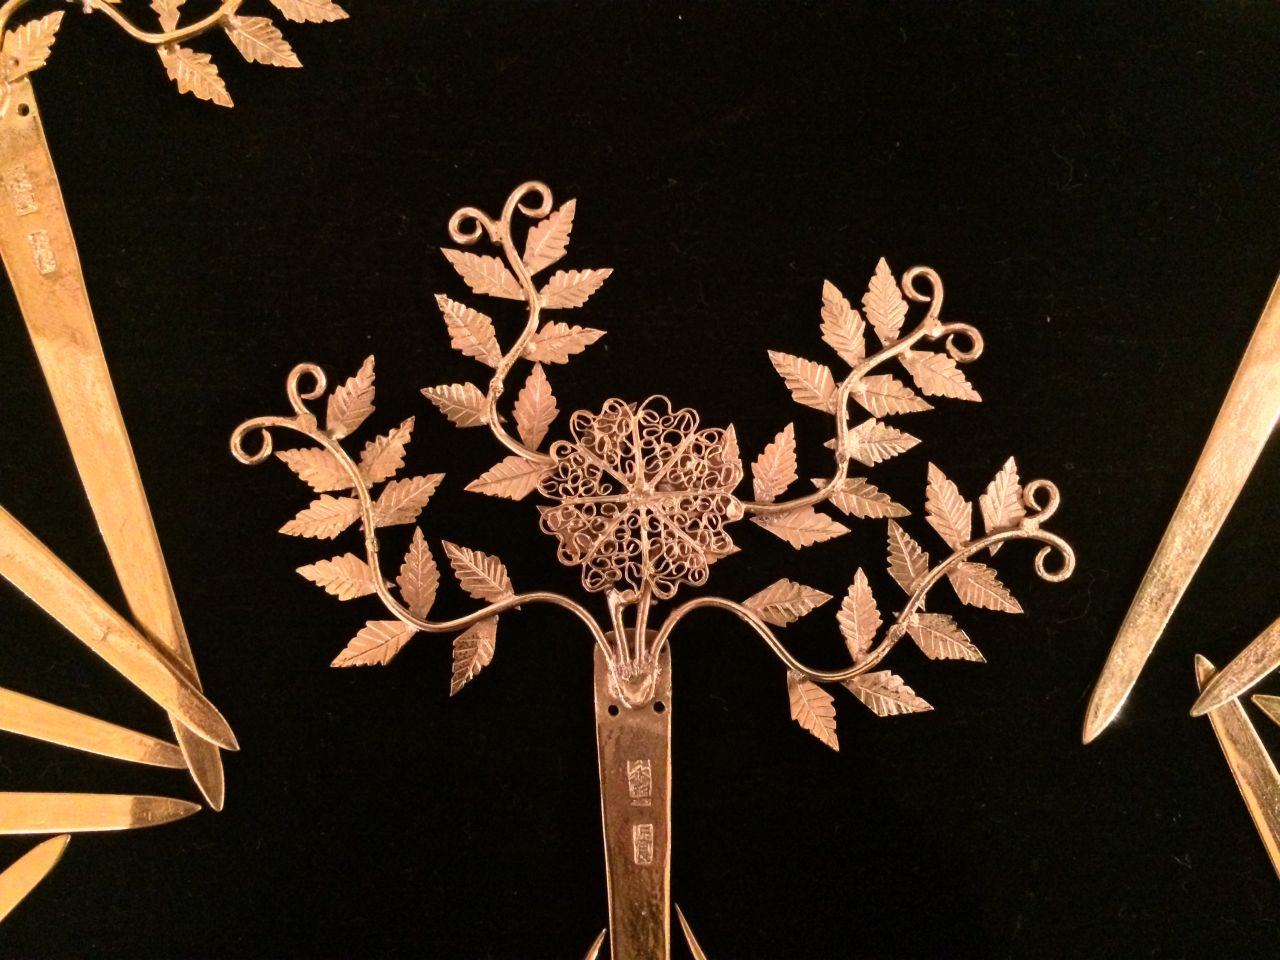 Wealthy merchants favored a sophisticated style, and appreciated the mastery of craftsmanship, such as this filigree of ferns, as much as the value of gems and gold on display.